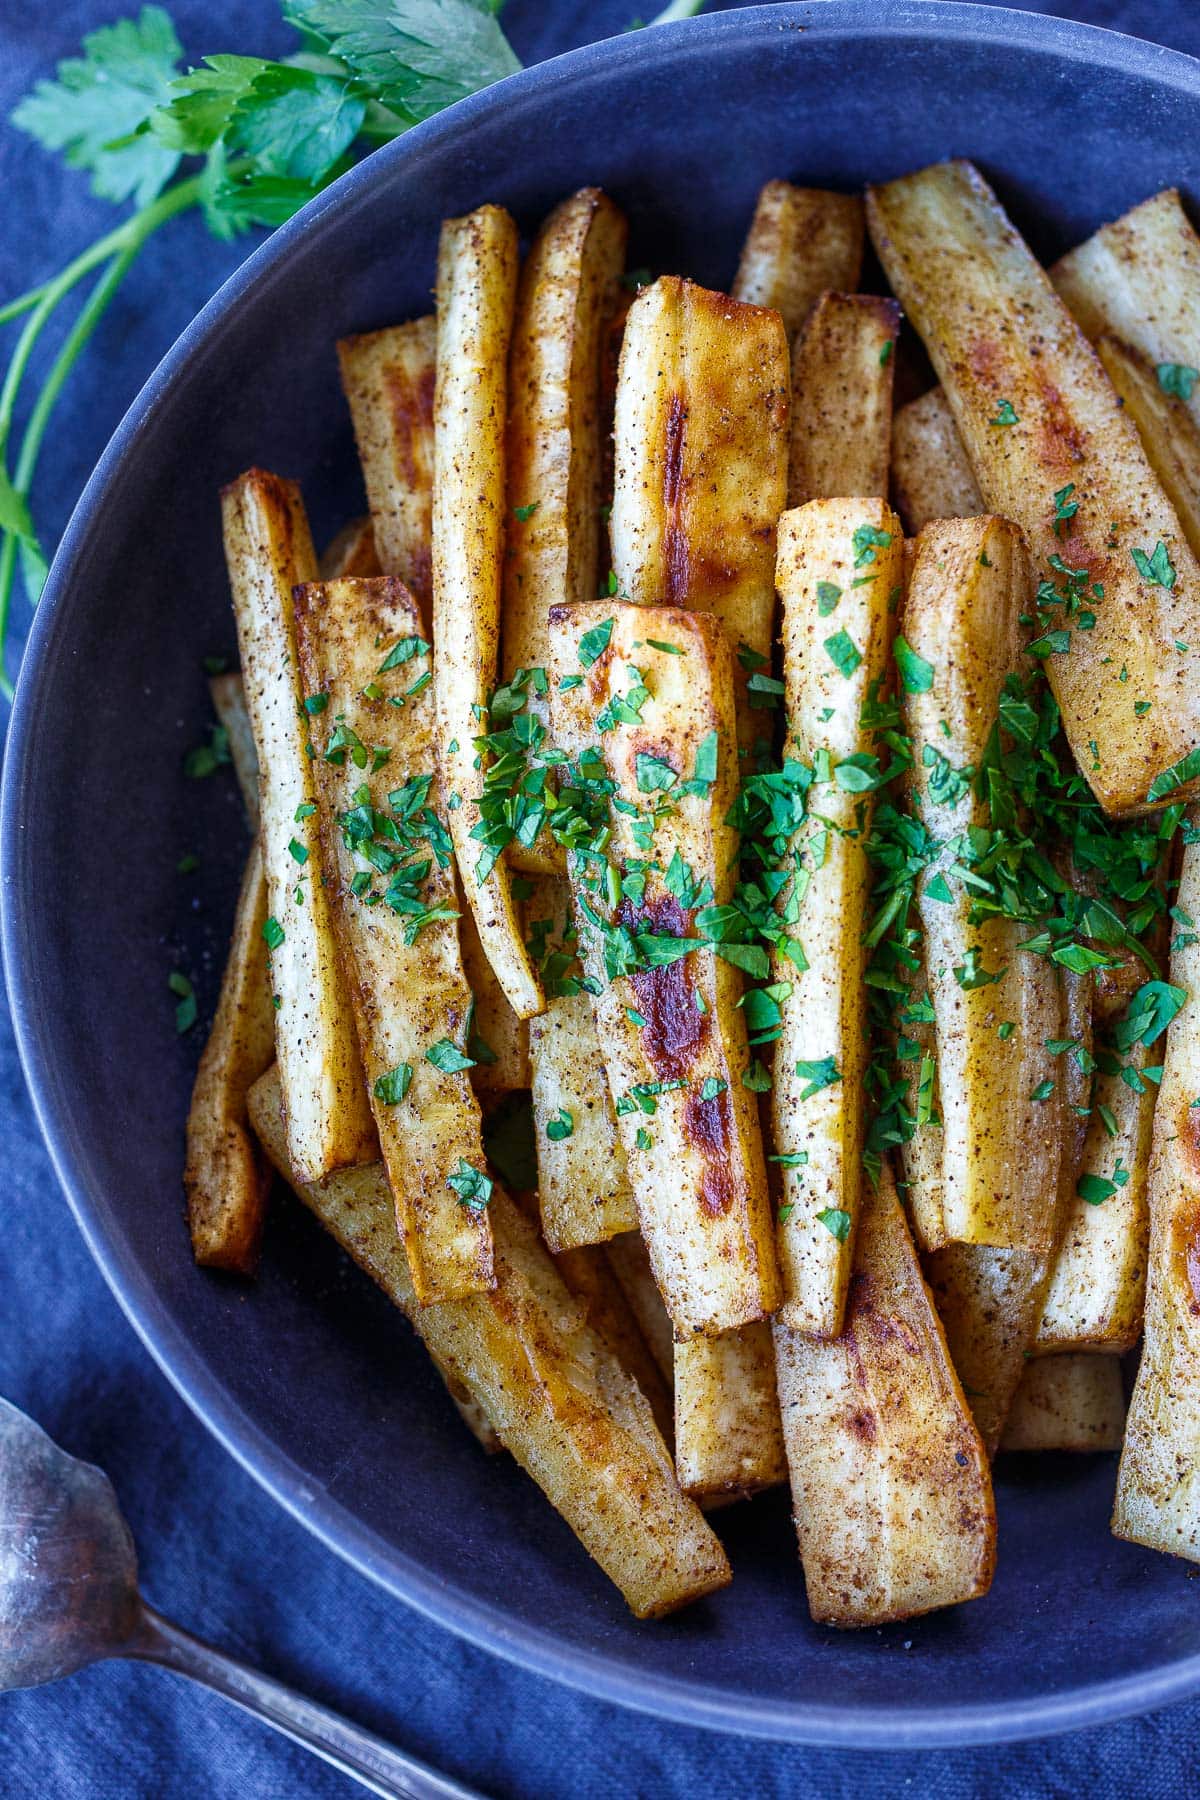 serving dish with roasted parsnips, seasoned well, garnished with minced fresh parsley